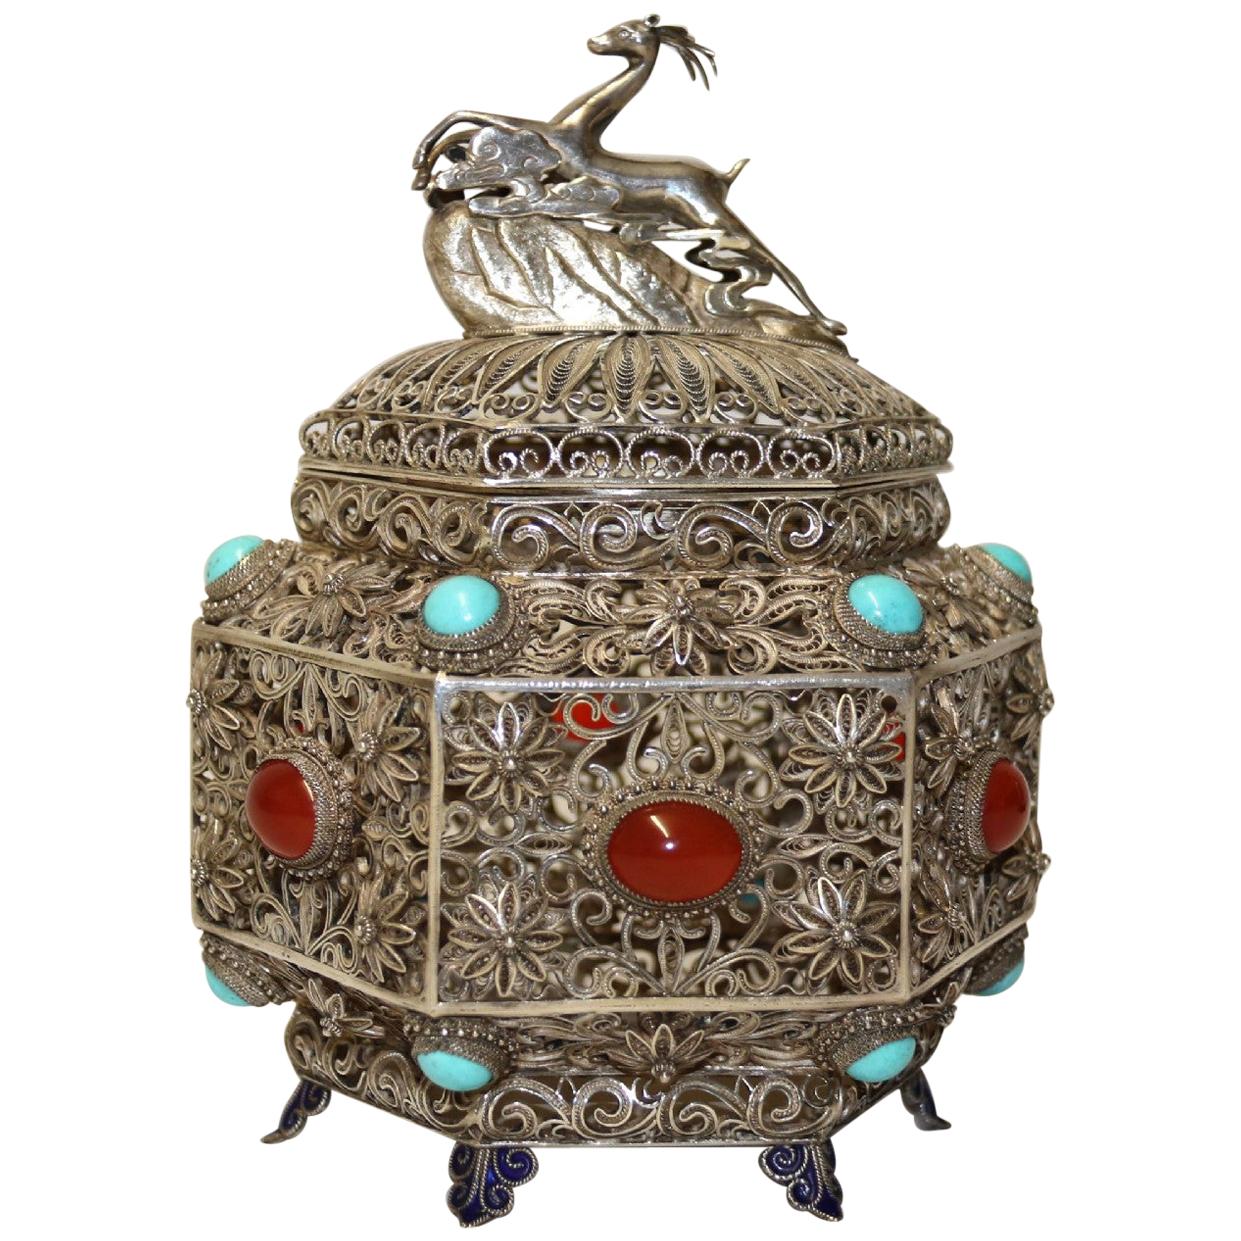 19th Century Indian Silver Filigree Work Incense Burner with Mounted Cabochons For Sale